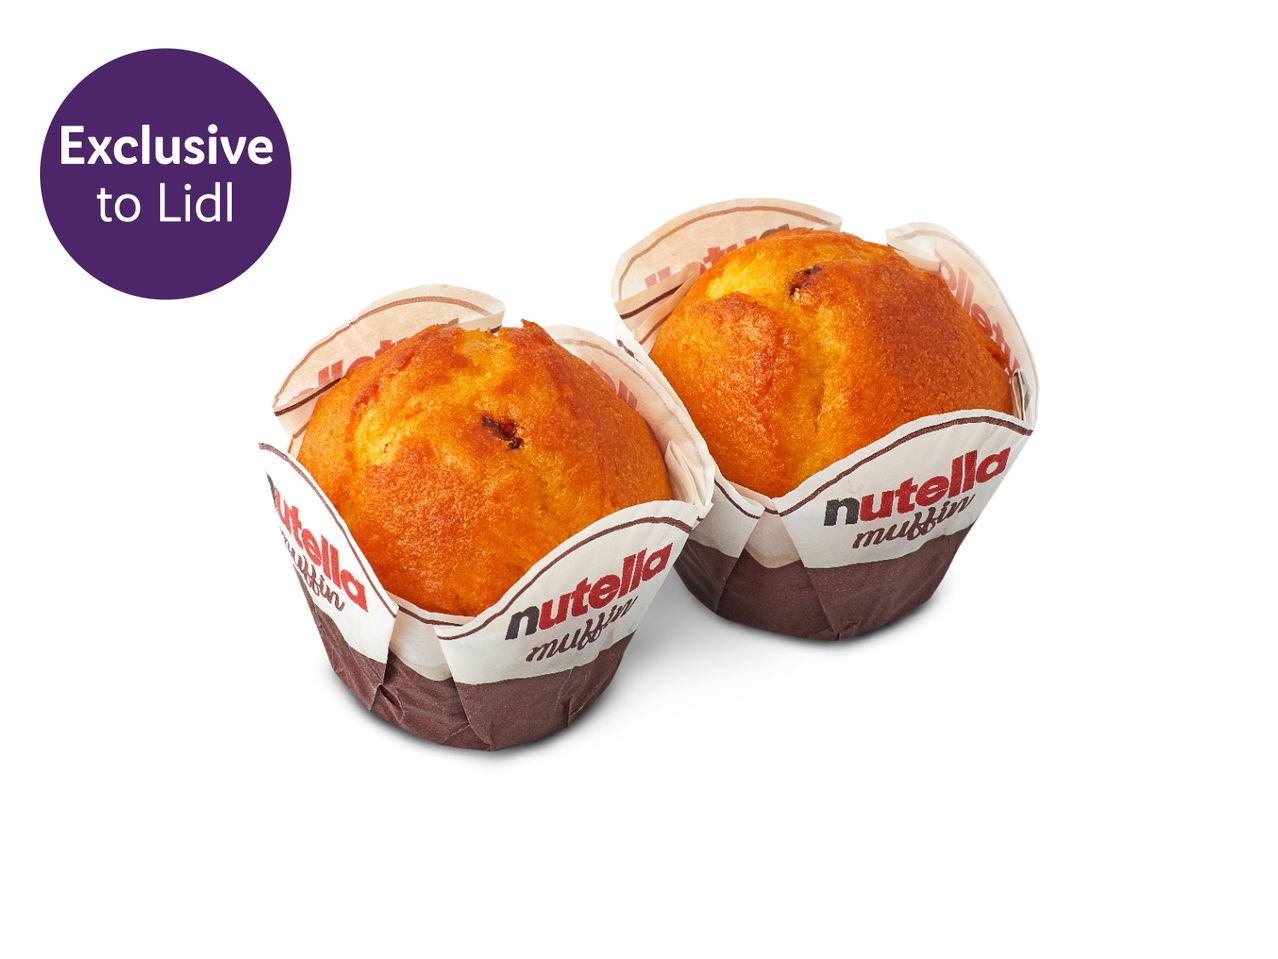 Go to full screen view: Nutella Muffins - Image 1